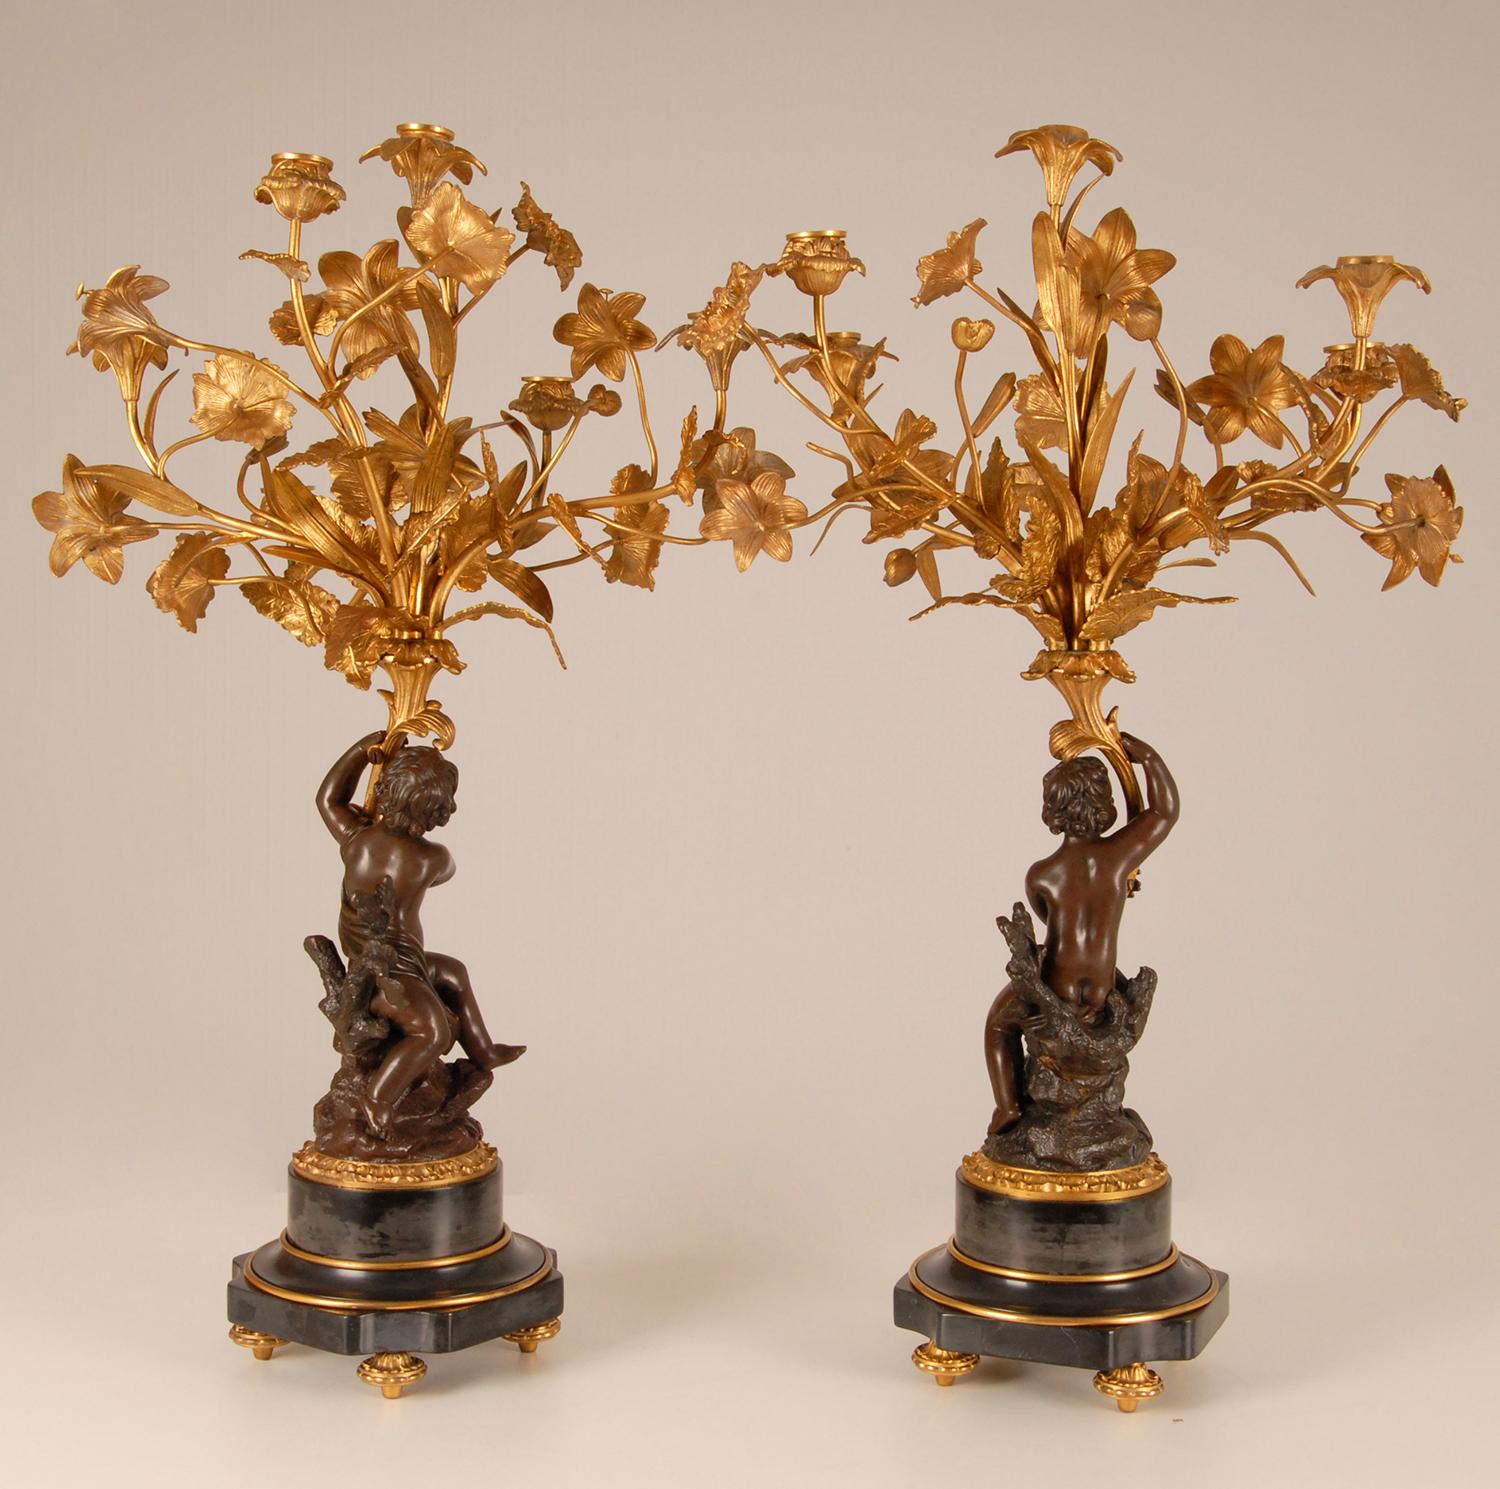 Victorian French Gold Gilded Bronze Putto and Flowers Candelabras on Marble Base In Good Condition For Sale In Wommelgem, VAN